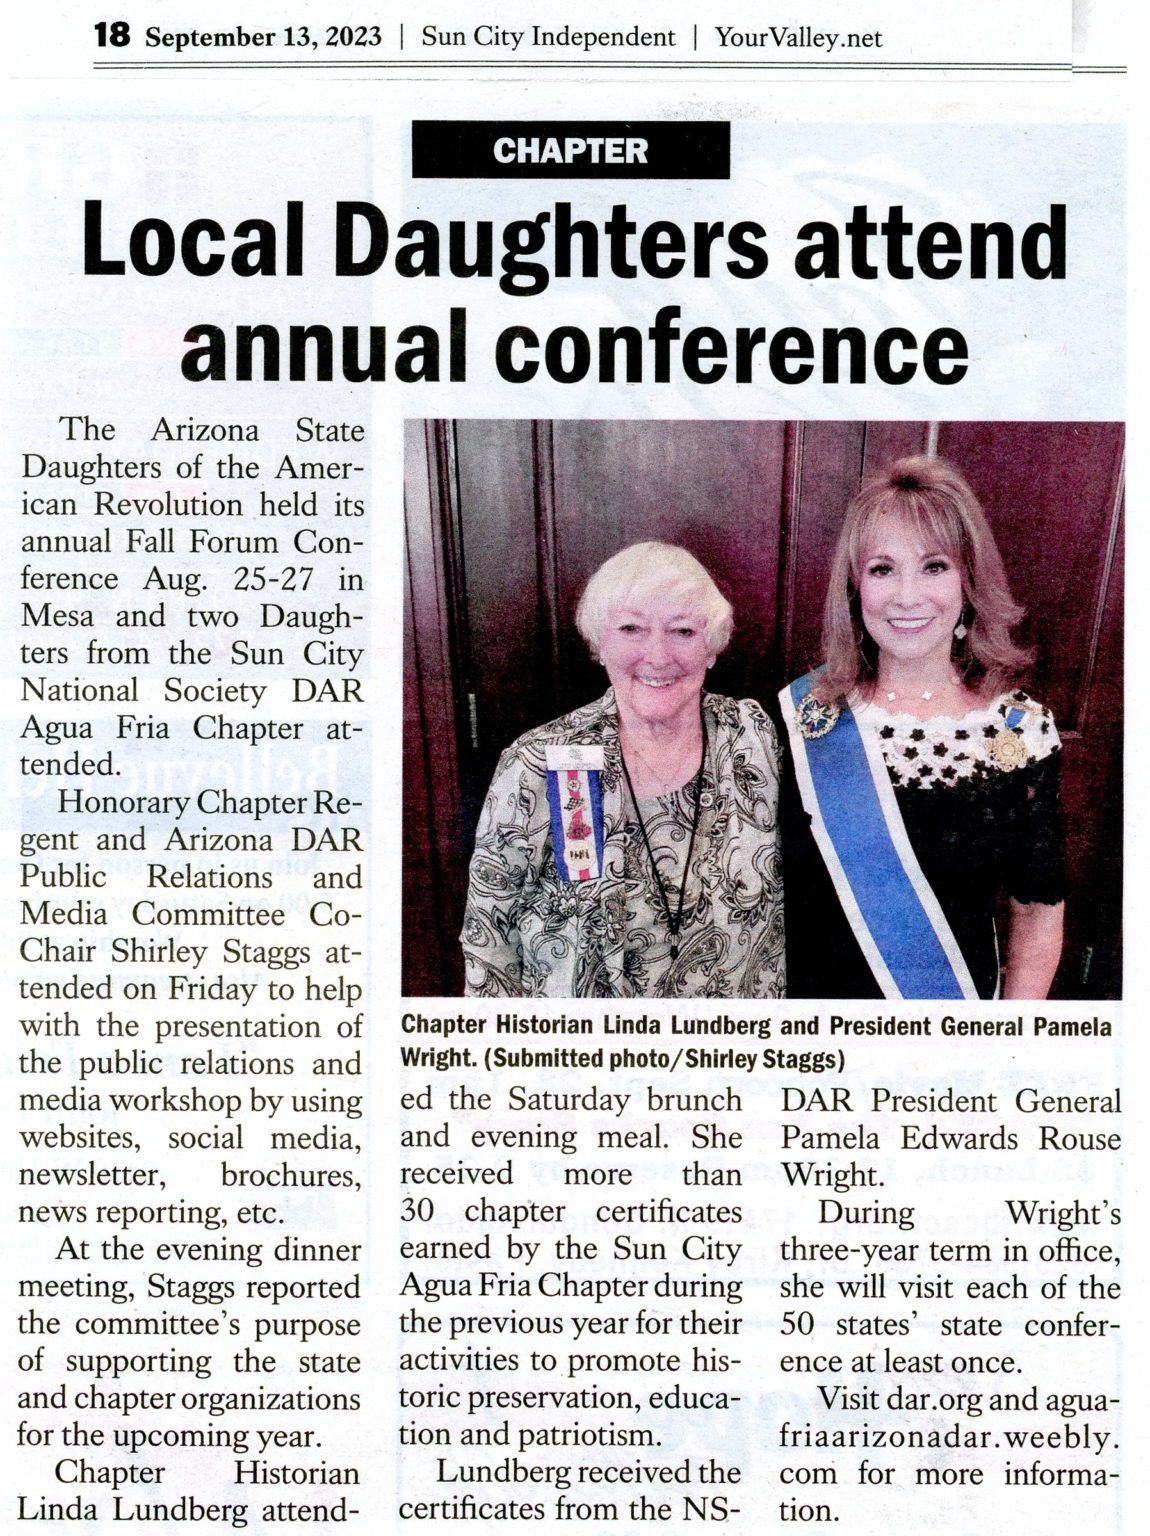 Newspaper Article. Local Daughters attend annual conference.